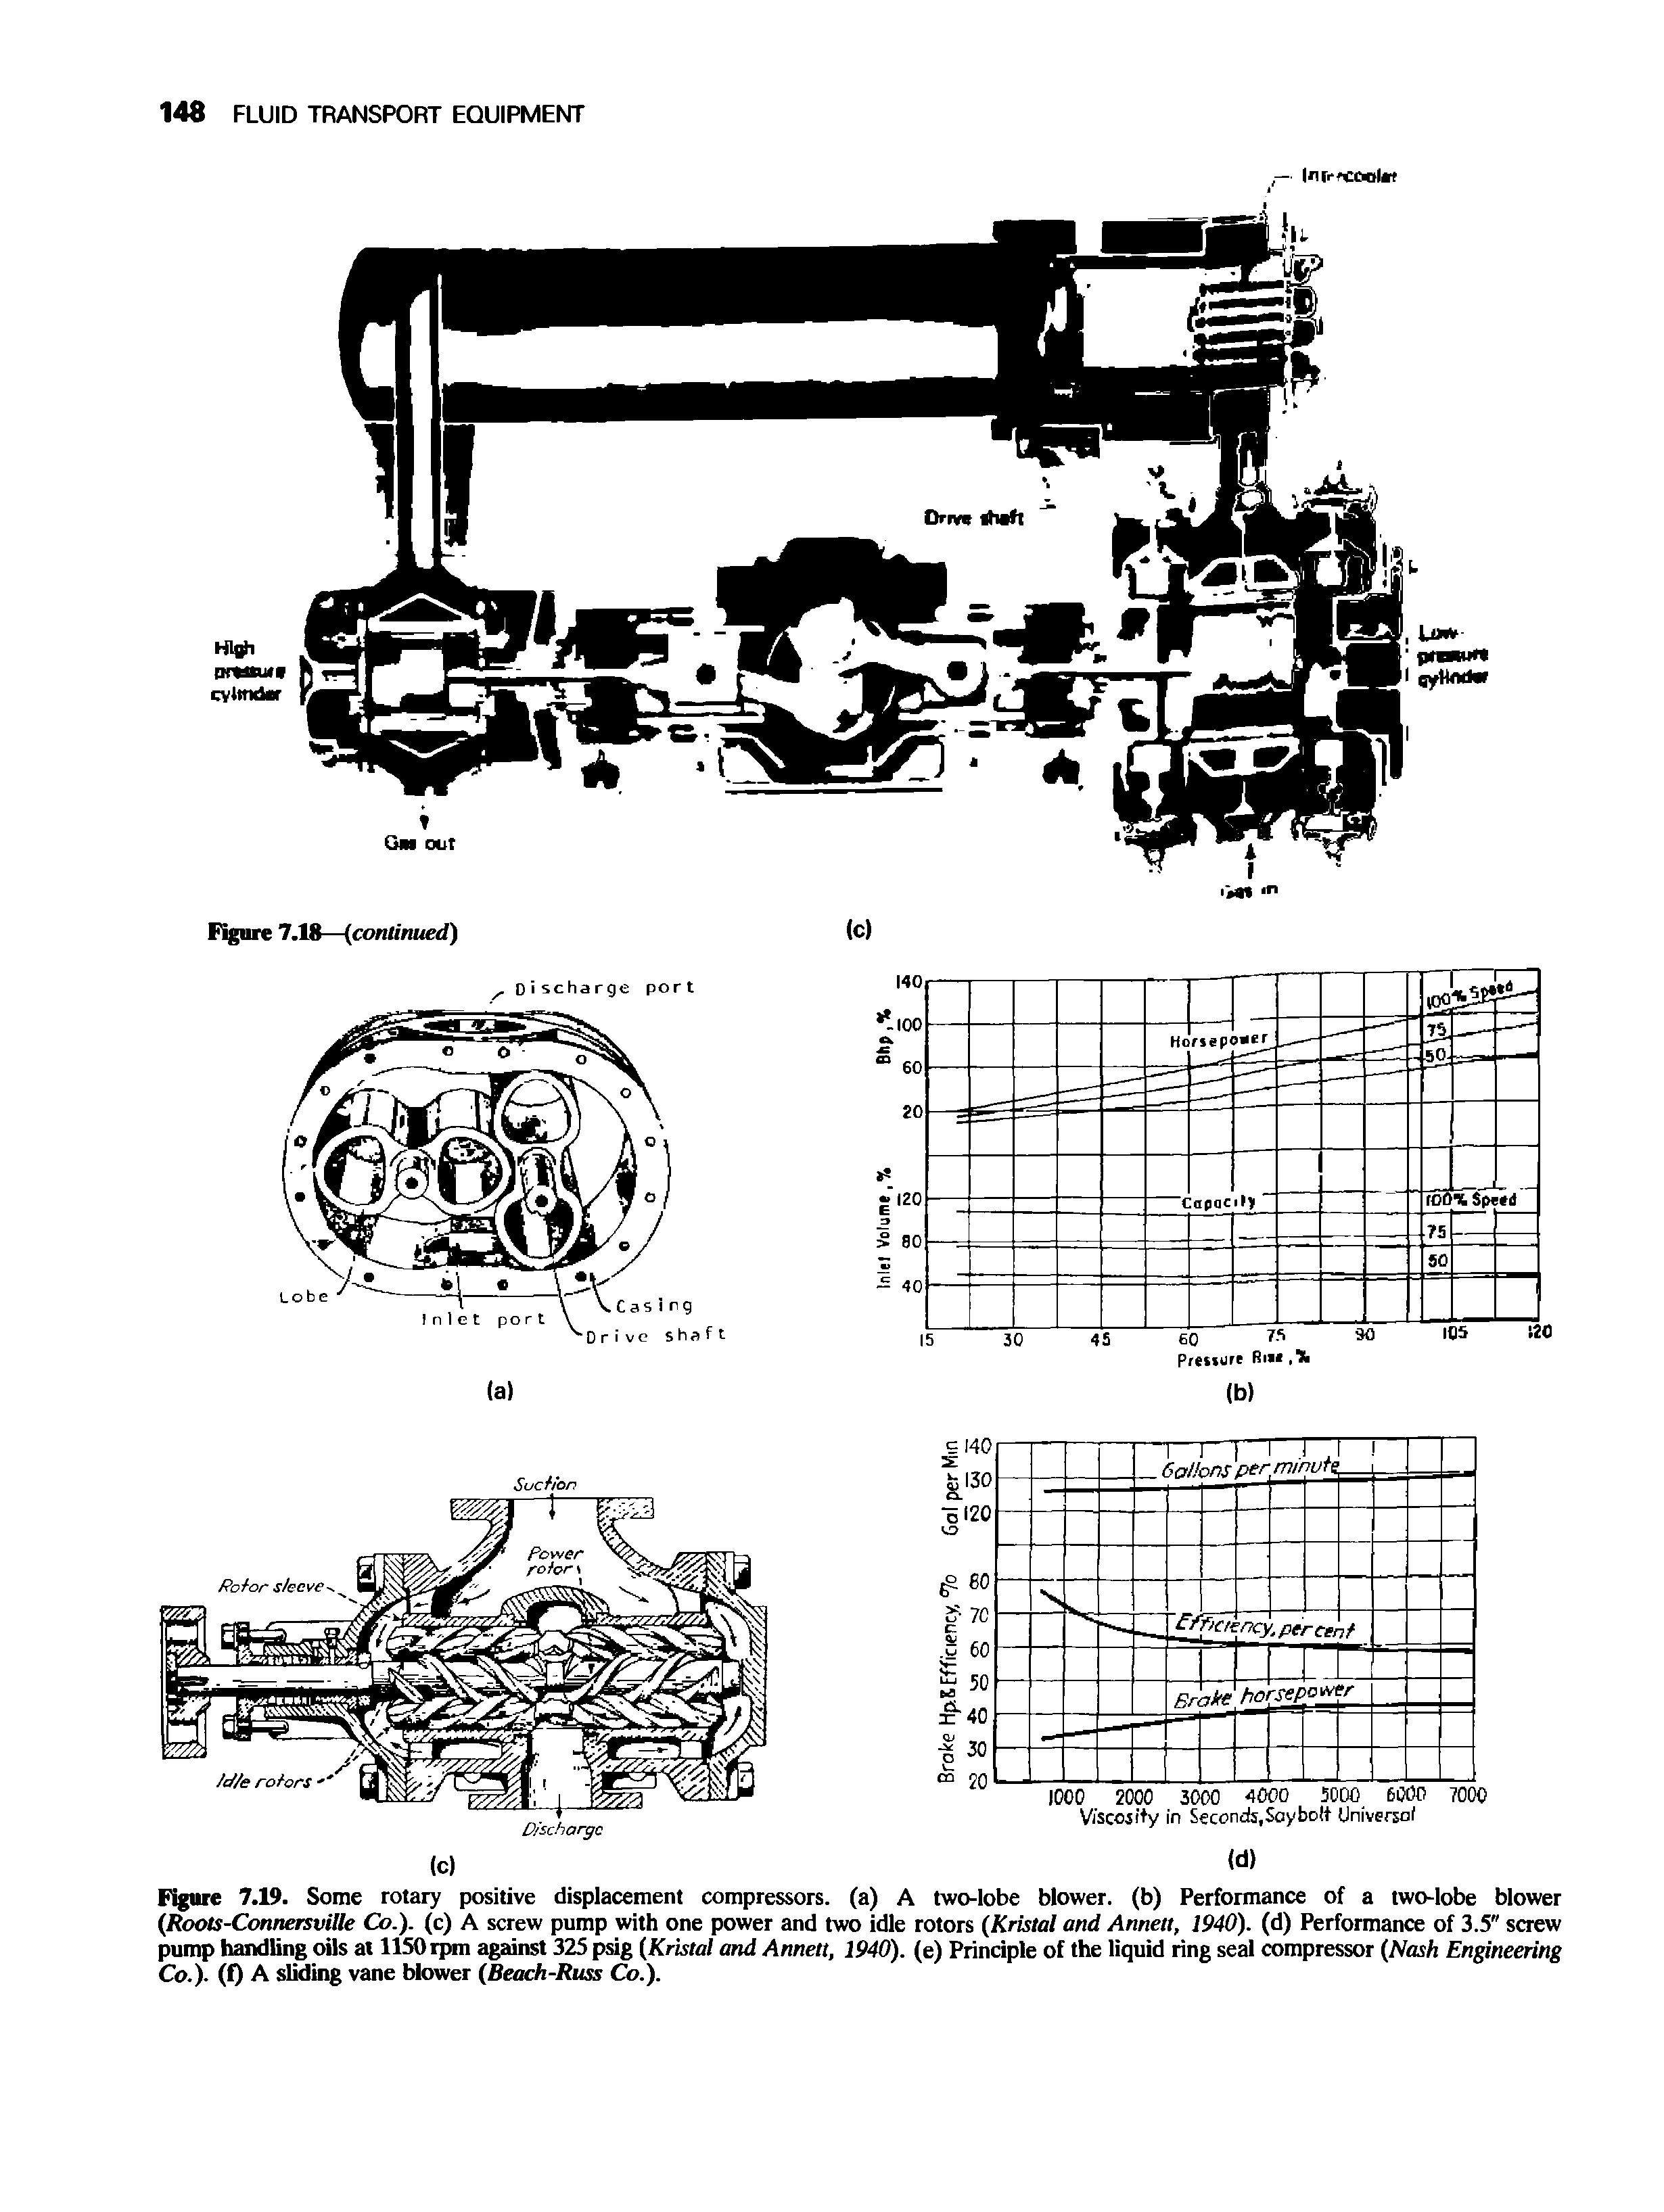 Figure 7.19. Some rotary positive displacement compressors, (a) A two-lobe blower, (b) Performance of a two-lobe blower (Rools-Connersville Co.), (c) A screw pump with one power and two idle rotors (Kristal and Annett, 1940). (d) Performance of 3.5" screw pump handling oils at 1150 rpm against 325 psig (Kristal and Annett, 1940). (e) Principle of the liquid ring seal compressor (Nash Engineering Co.). (0 A sliding vane blower (Beaeh-Russ Co.).